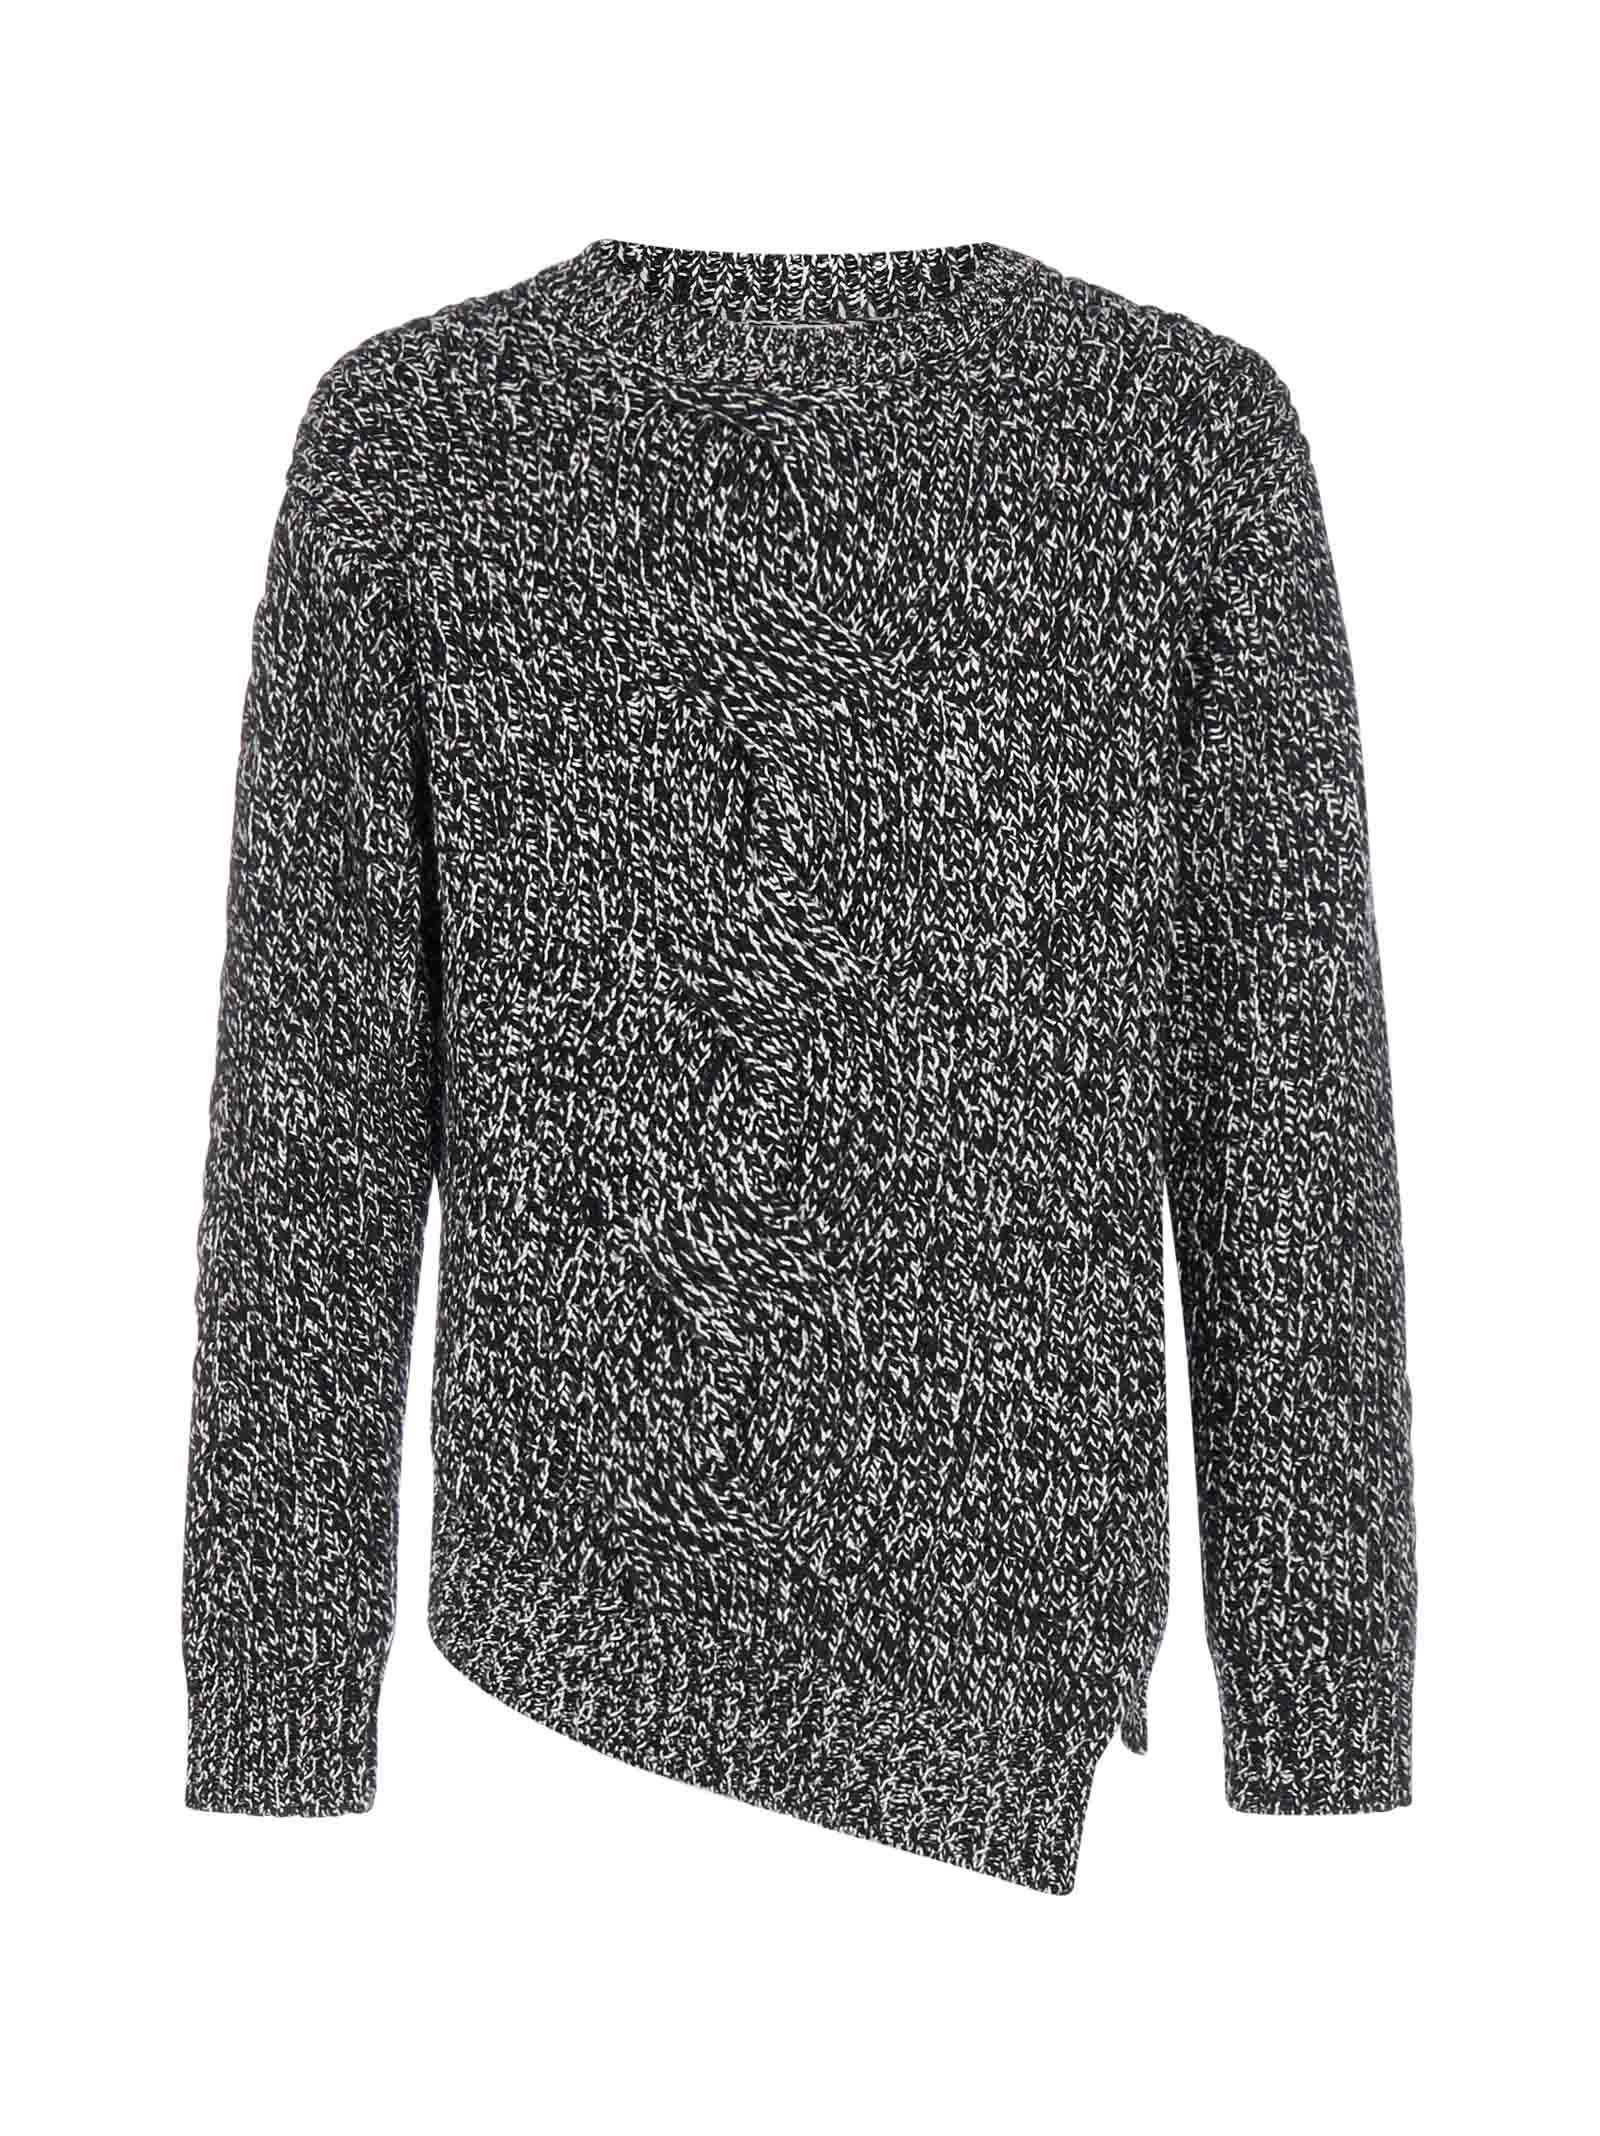 Alexander McQueen Asymmetric Cable-knit Wool And Cashmere Sweater